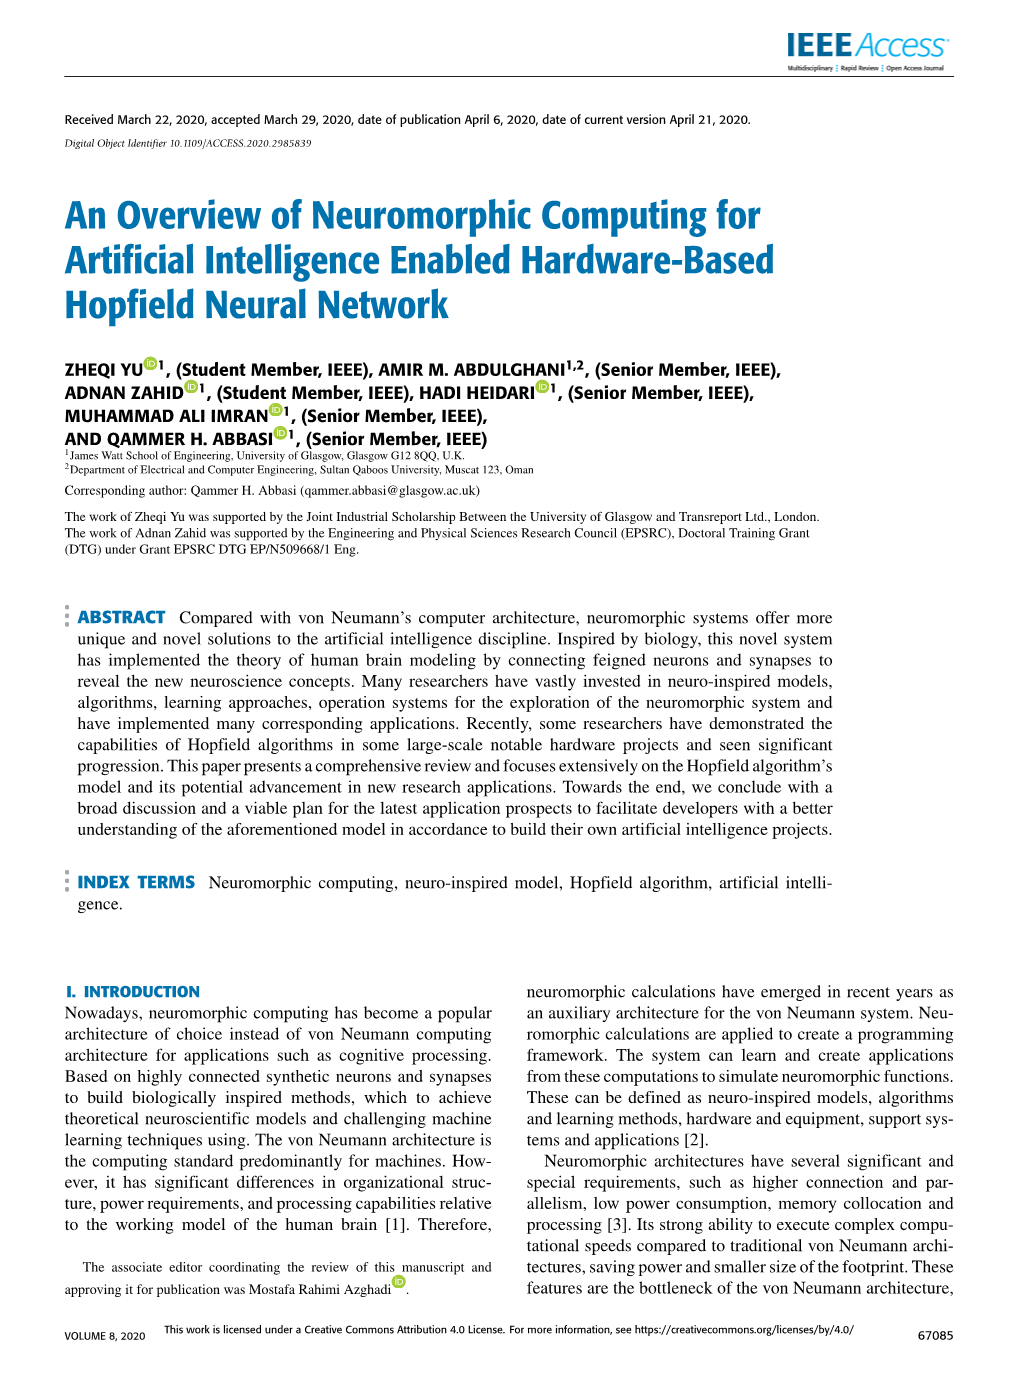 An Overview of Neuromorphic Computing for Artificial Intelligence Enabled Hardware-Based Hopfield Neural Network